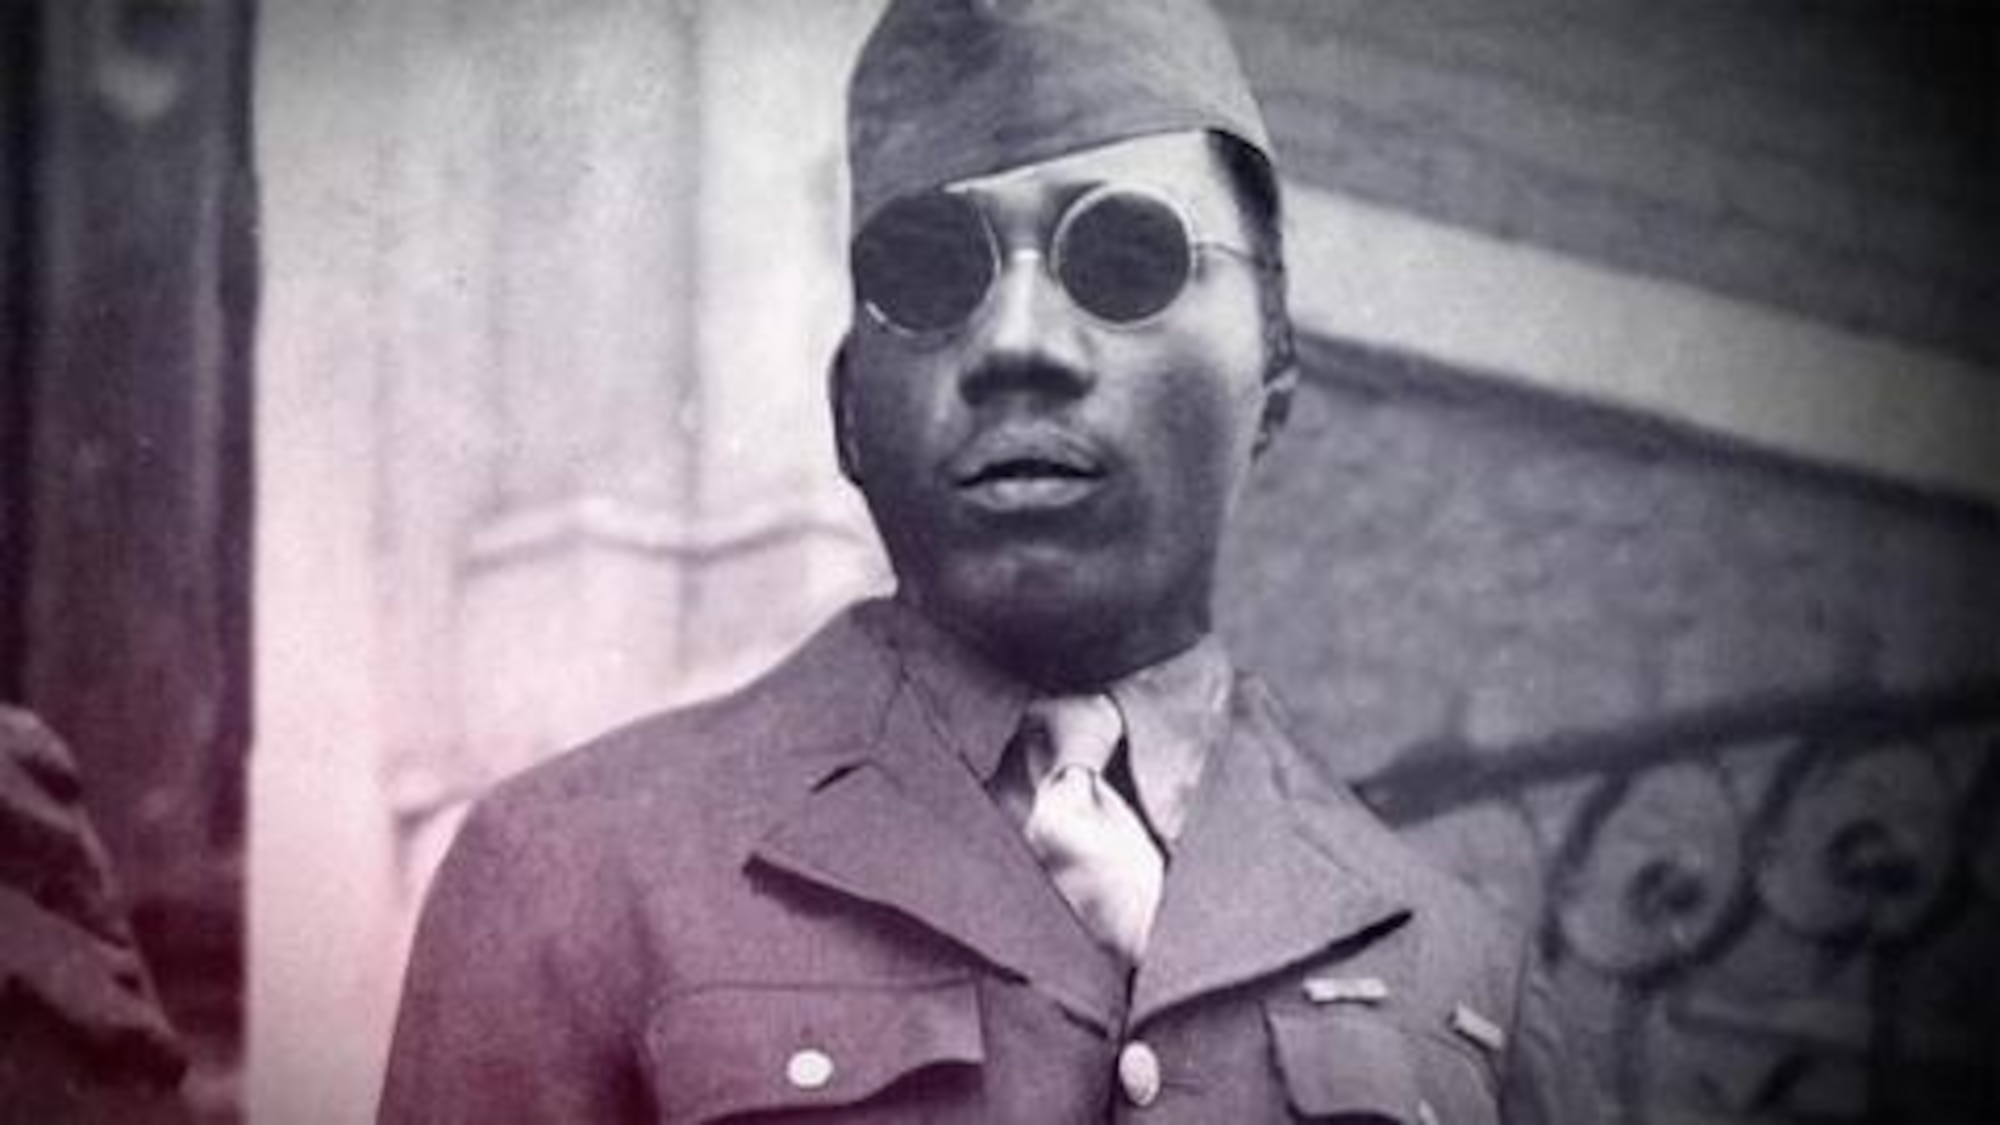 saac Woodard Jr. was a decorated African-American World War II veteran. On February 12, 1946, hours after being honorably discharged from the United States Army, he was attacked while still in uniform by South Carolina police as he was taking a bus home.